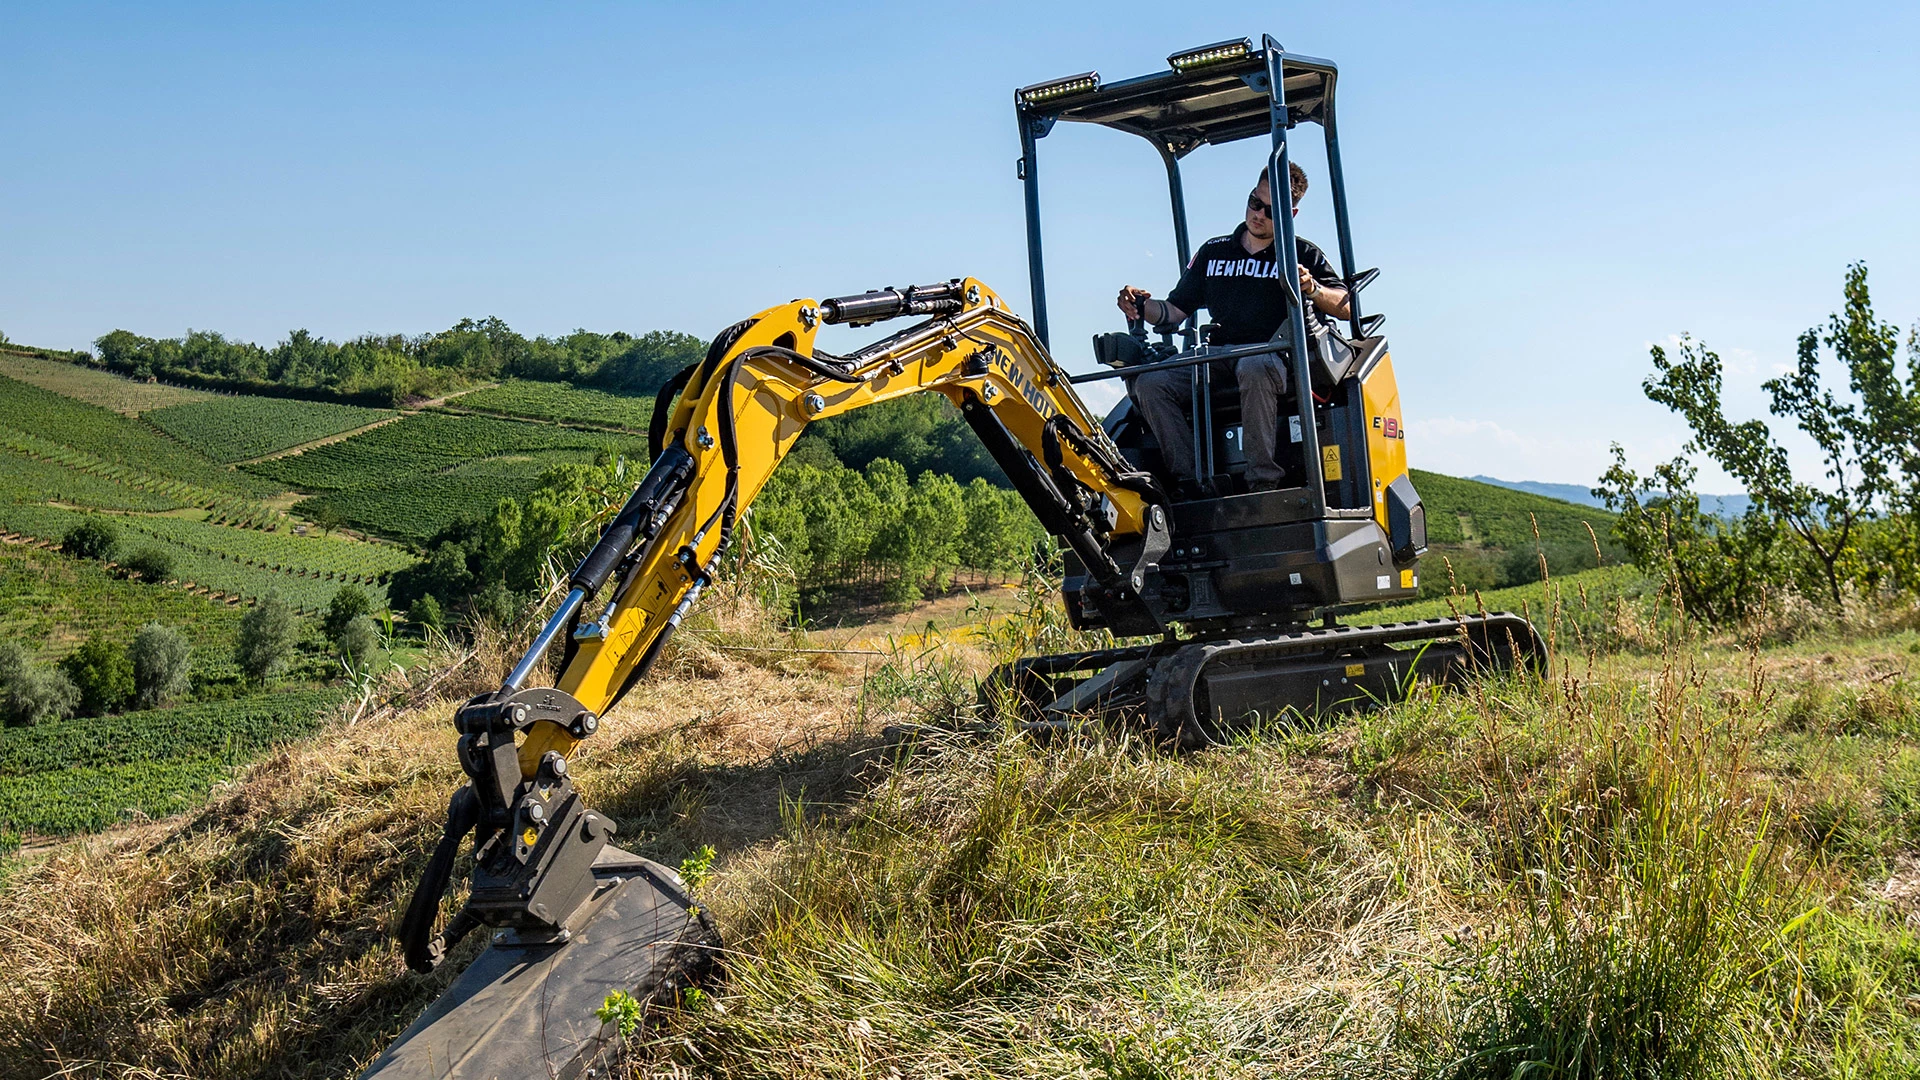 New Holland mini crawler excavator digging soil in agricultural field, village and trees in background.